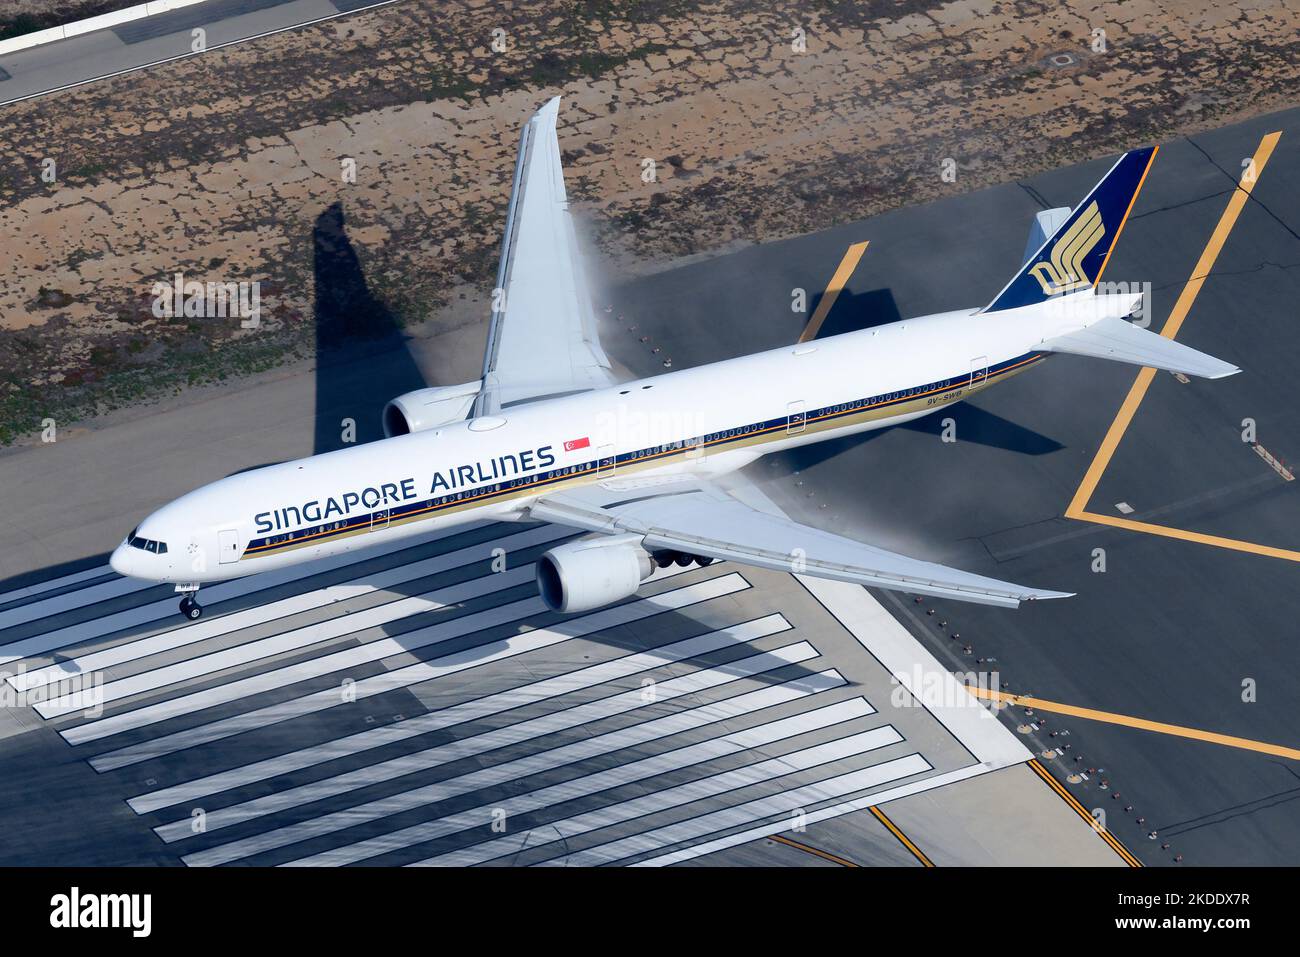 Singapore Airlines Boeing 777 aircraft over runway threshold. Airplane 777-300ER of Singapore Airlines registered as 9V-SWB above runway. Plane B777. Stock Photo